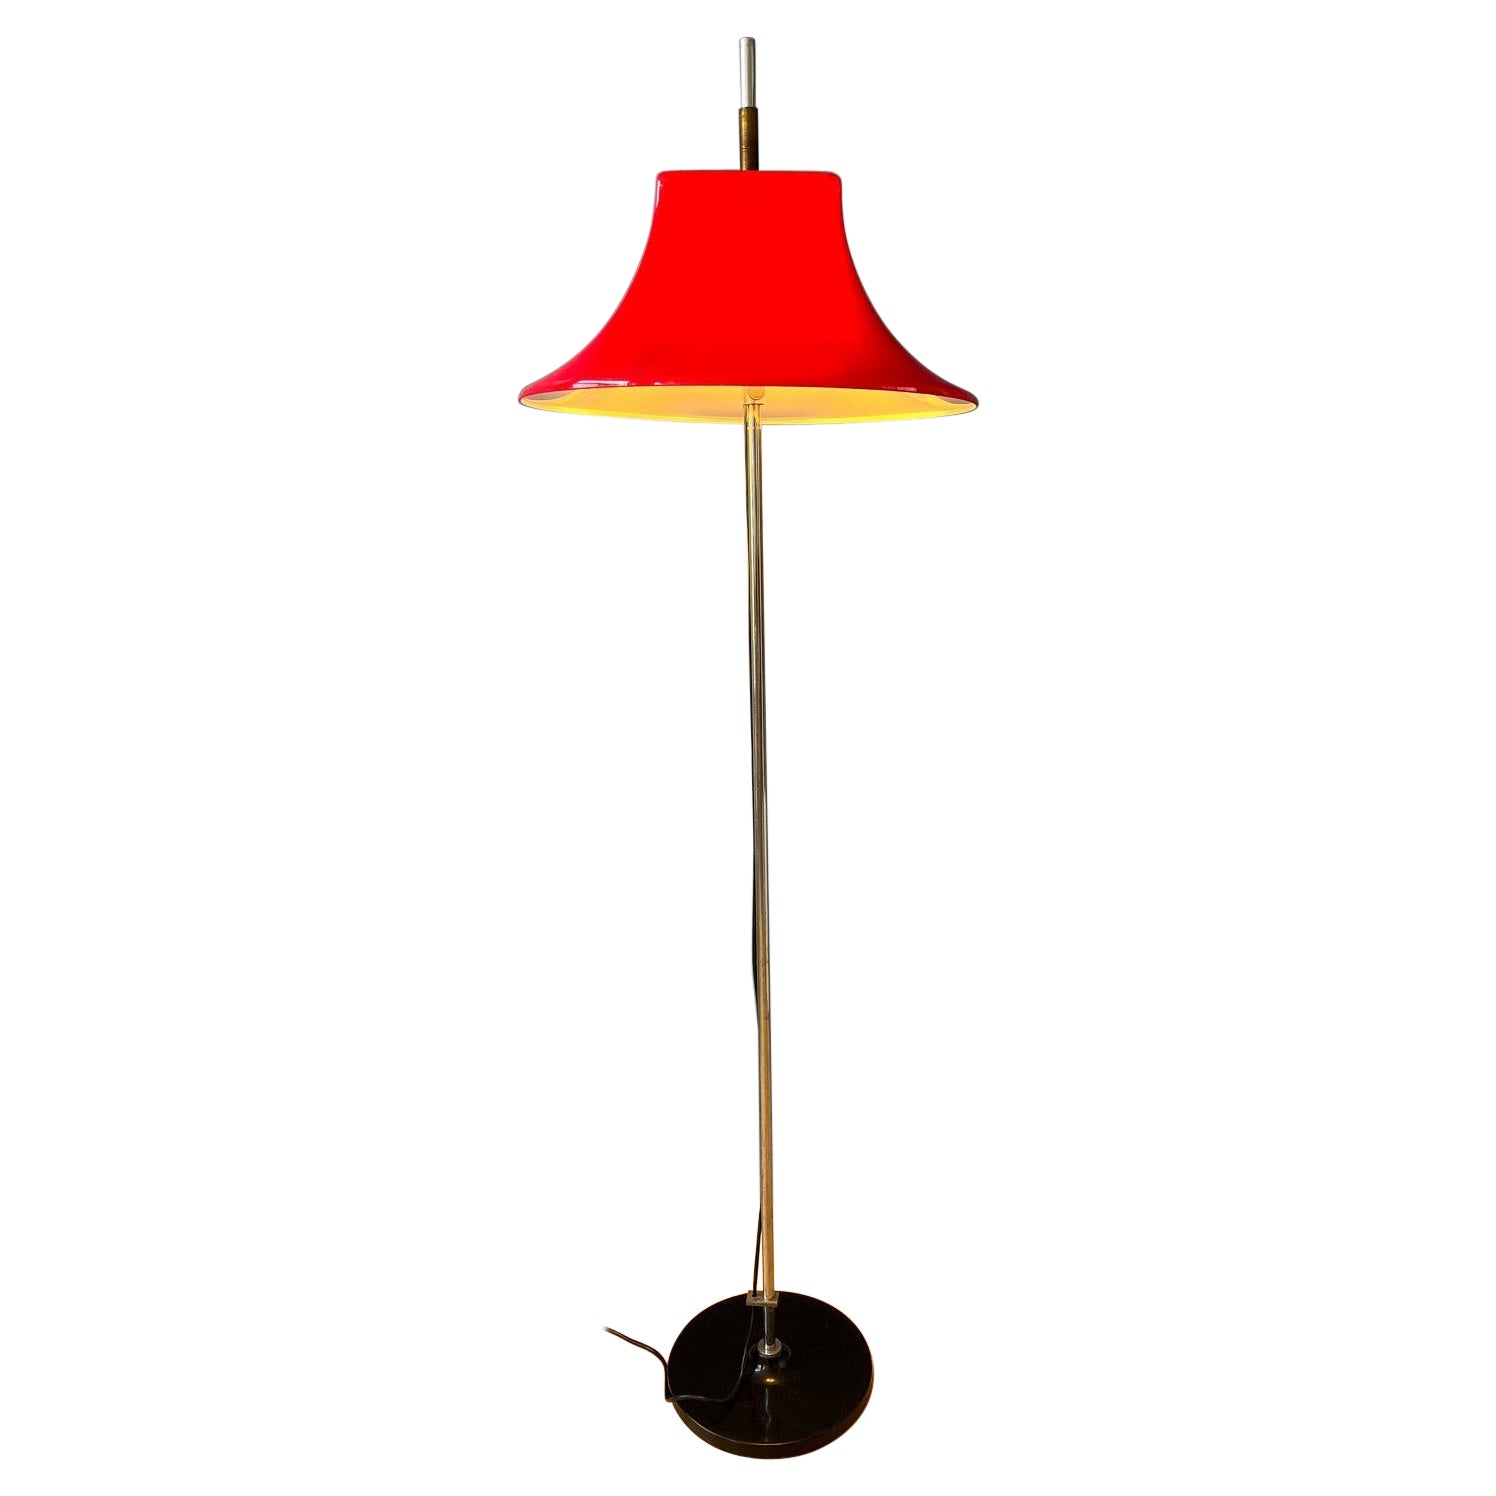 Red Willem Hagoort Space Age Floor Lamp - Mid Century Acrylic Glass Lamp, 1970s For Sale